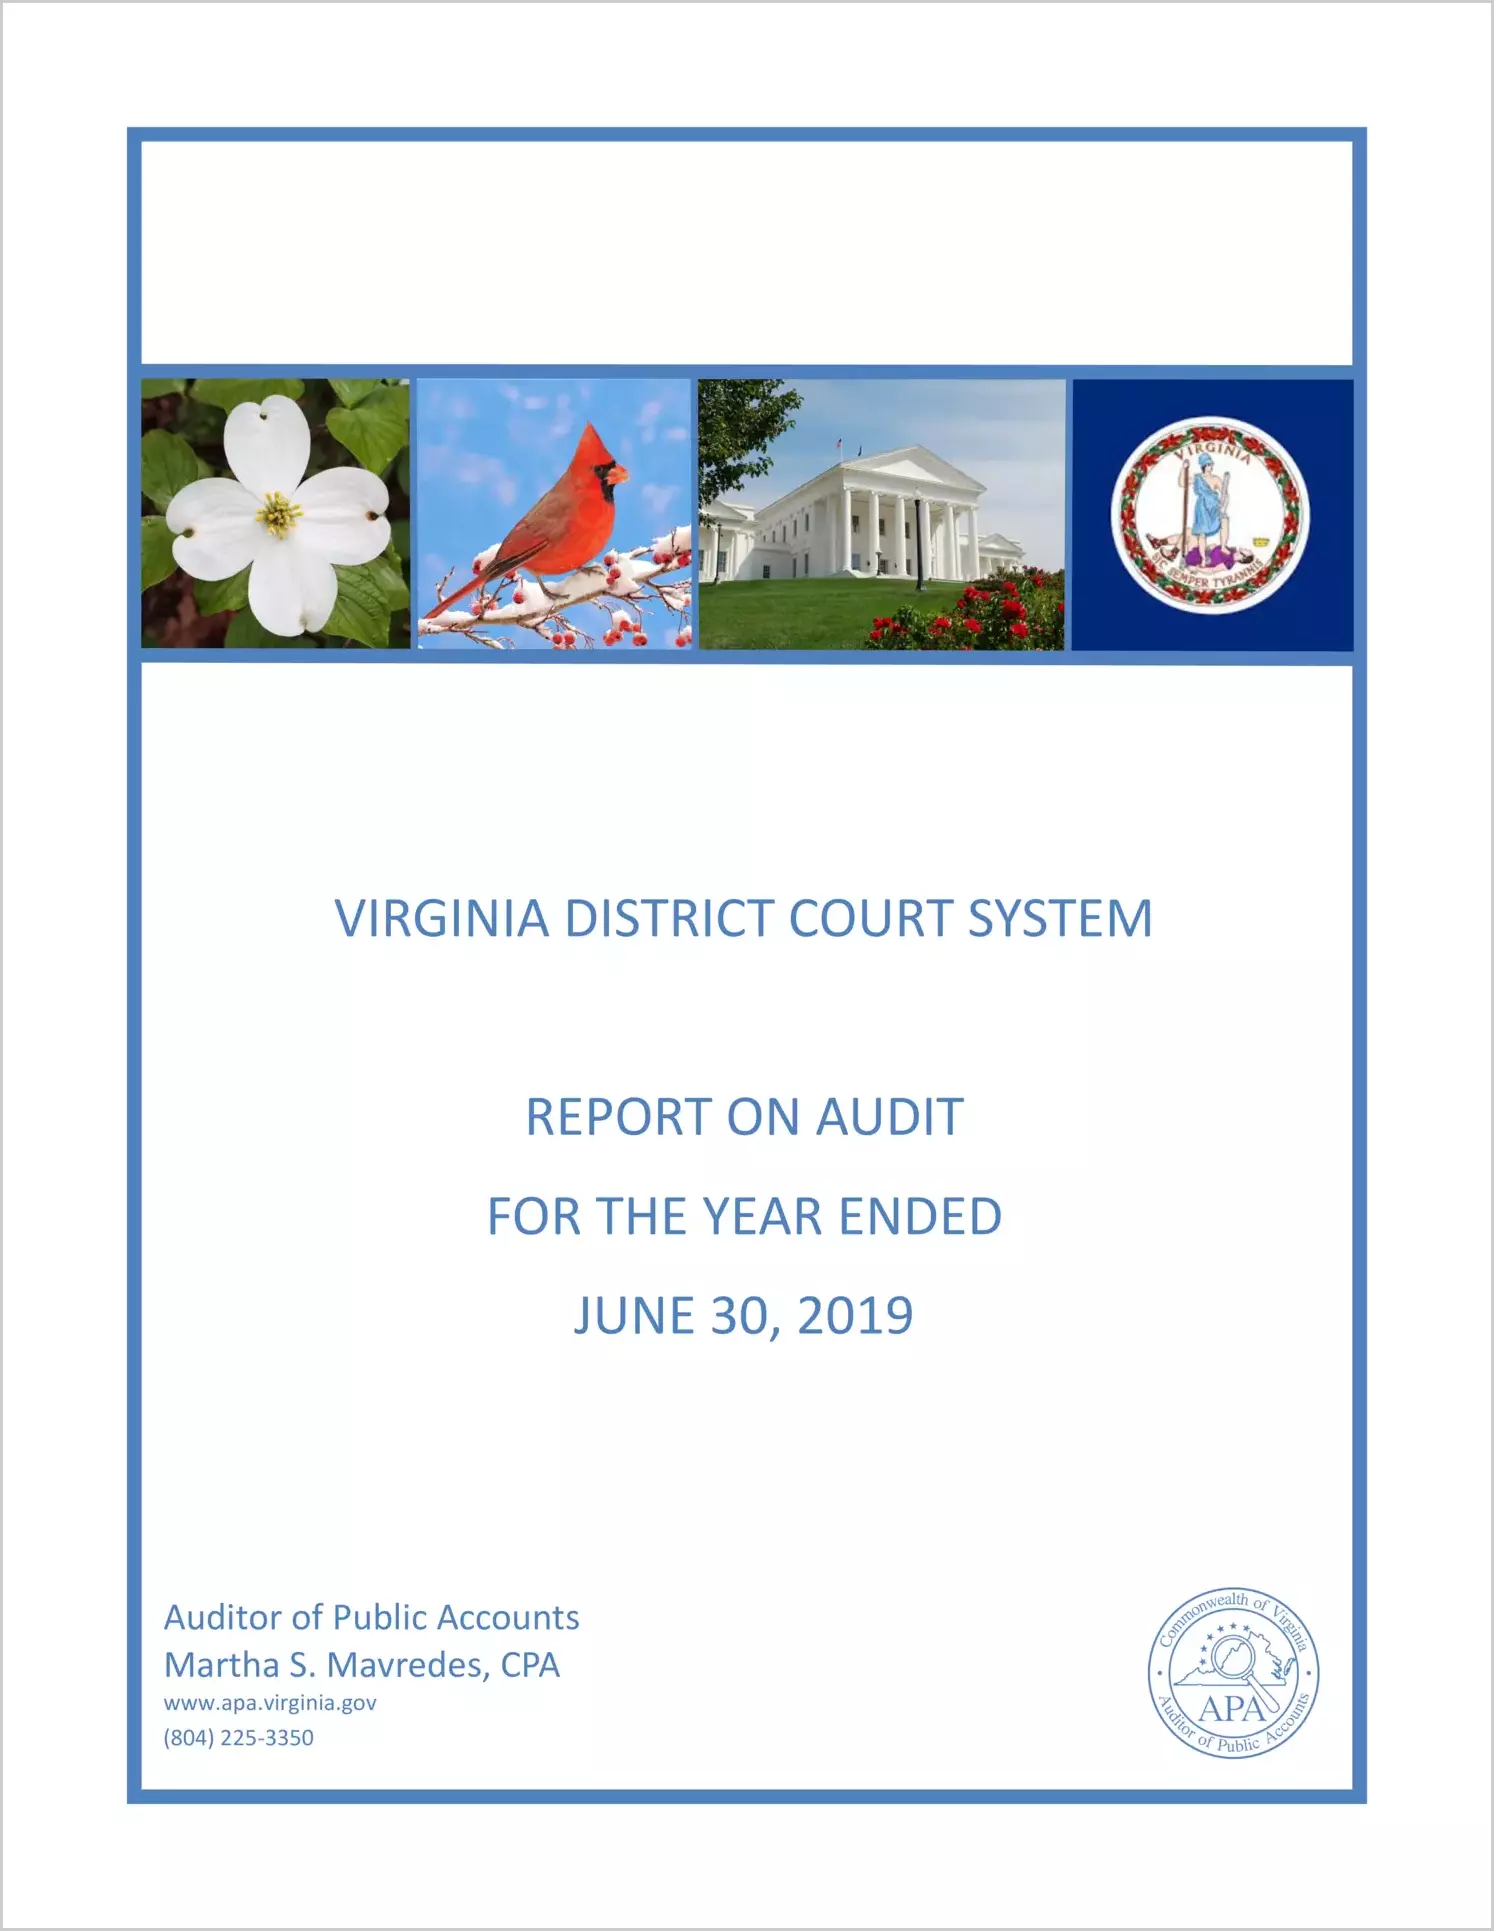 Virginia District Court System for the year ended June 30, 2019